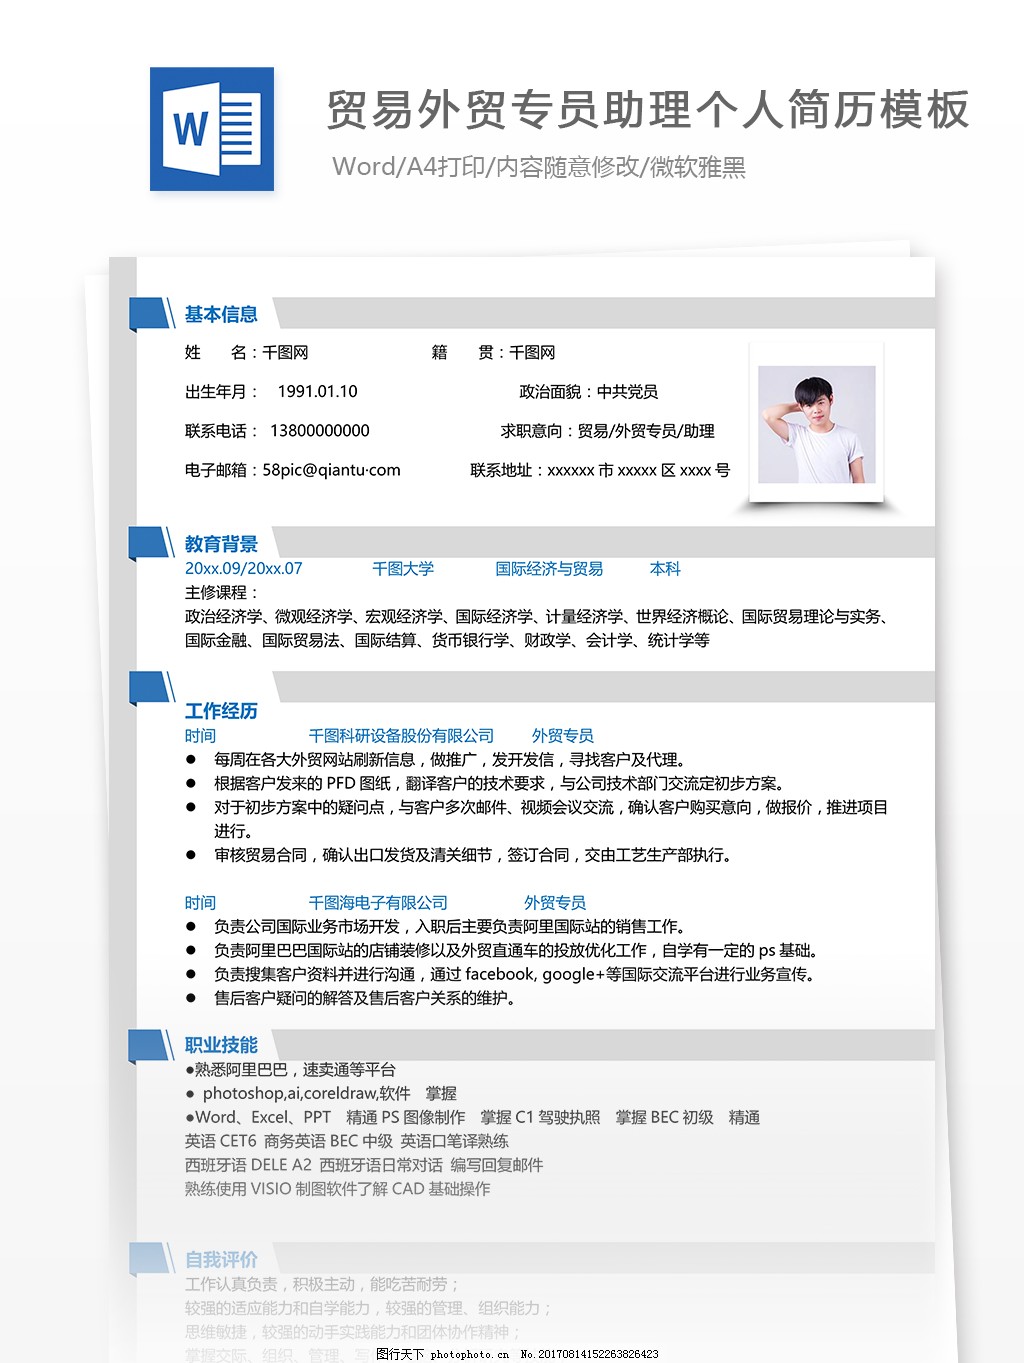 Blue Minimalist Style International Trade Professional Resume Template Template Download on Pngtree